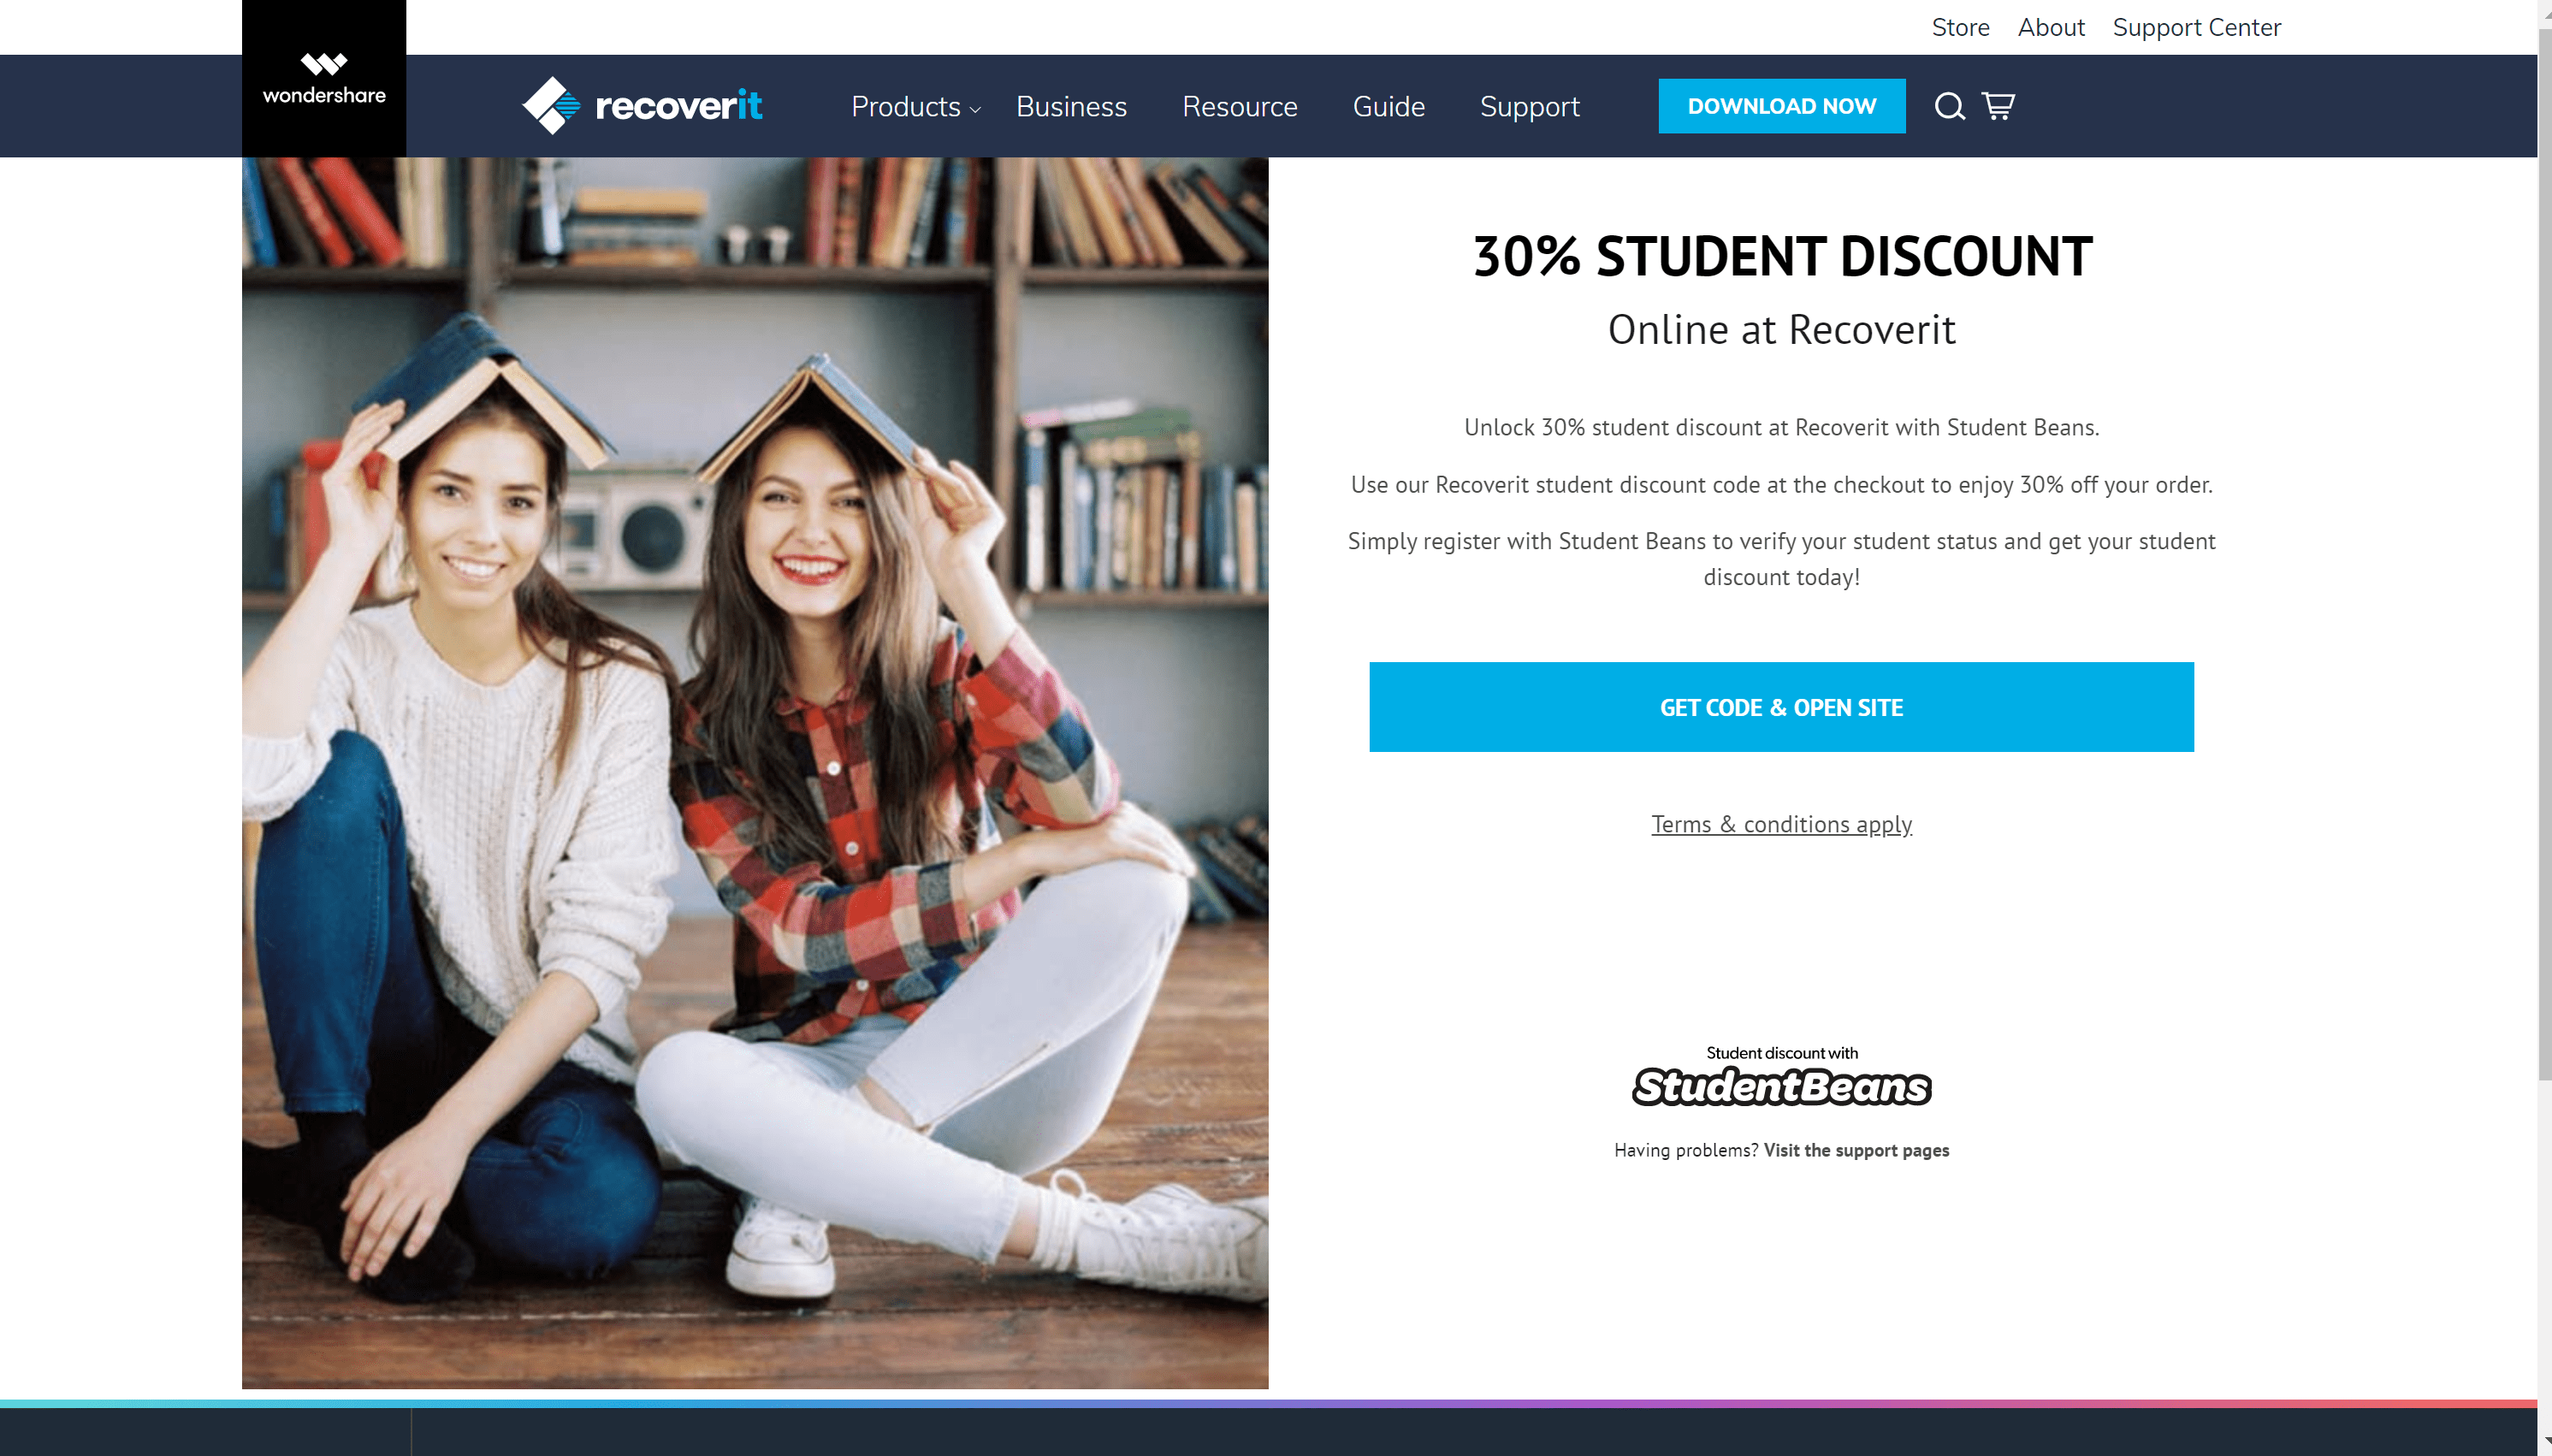 Recoverit student discount